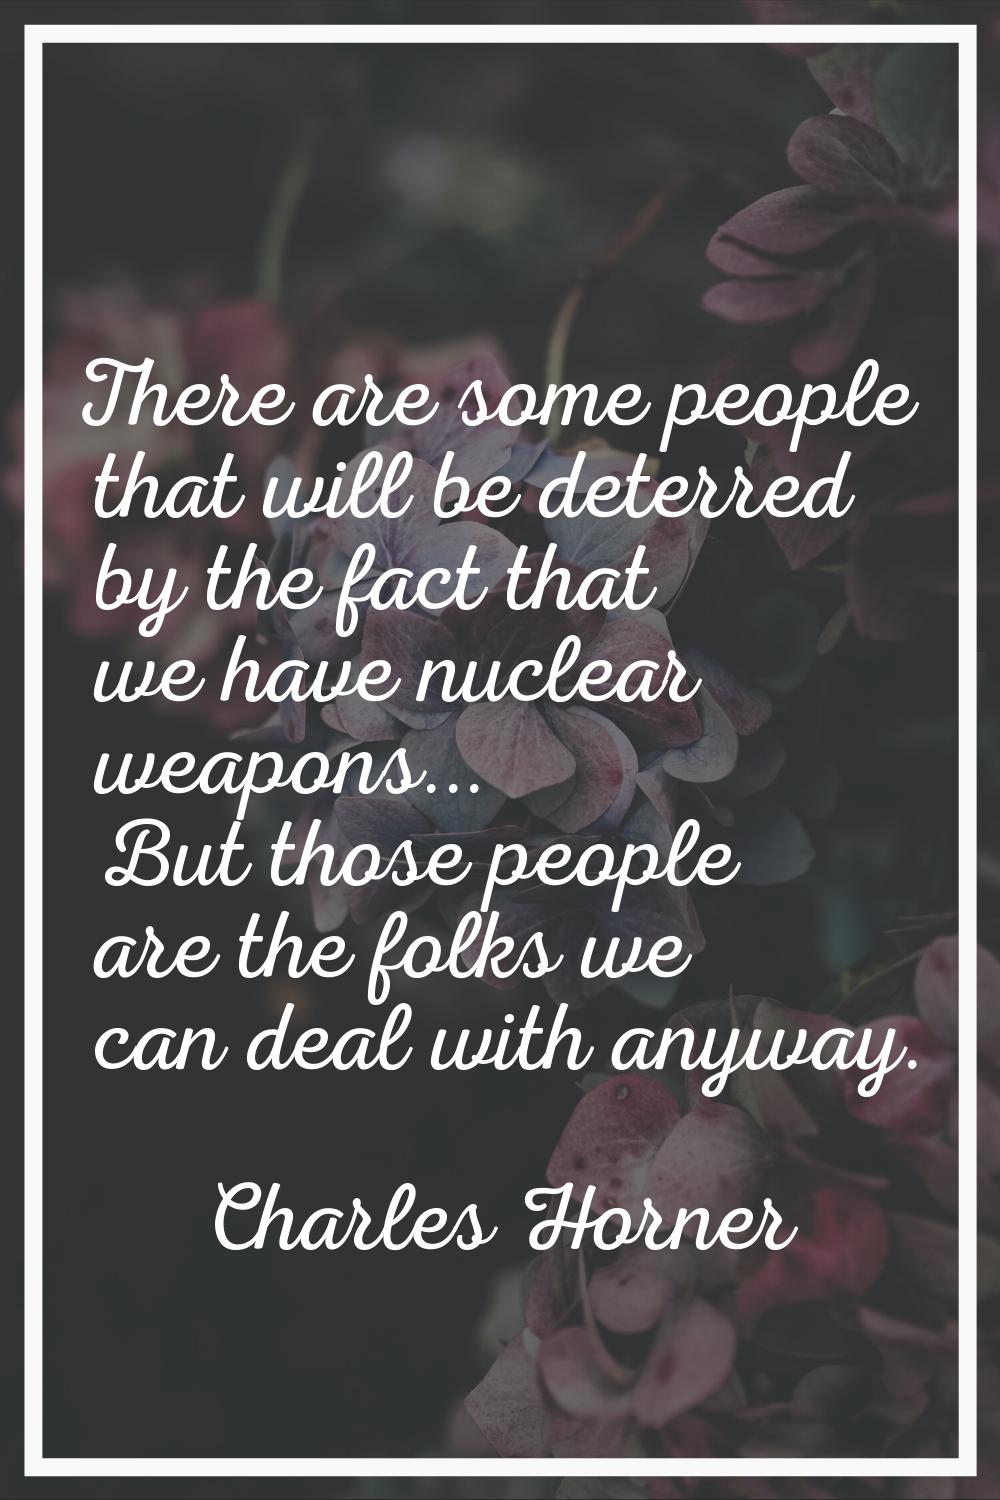 There are some people that will be deterred by the fact that we have nuclear weapons... But those p